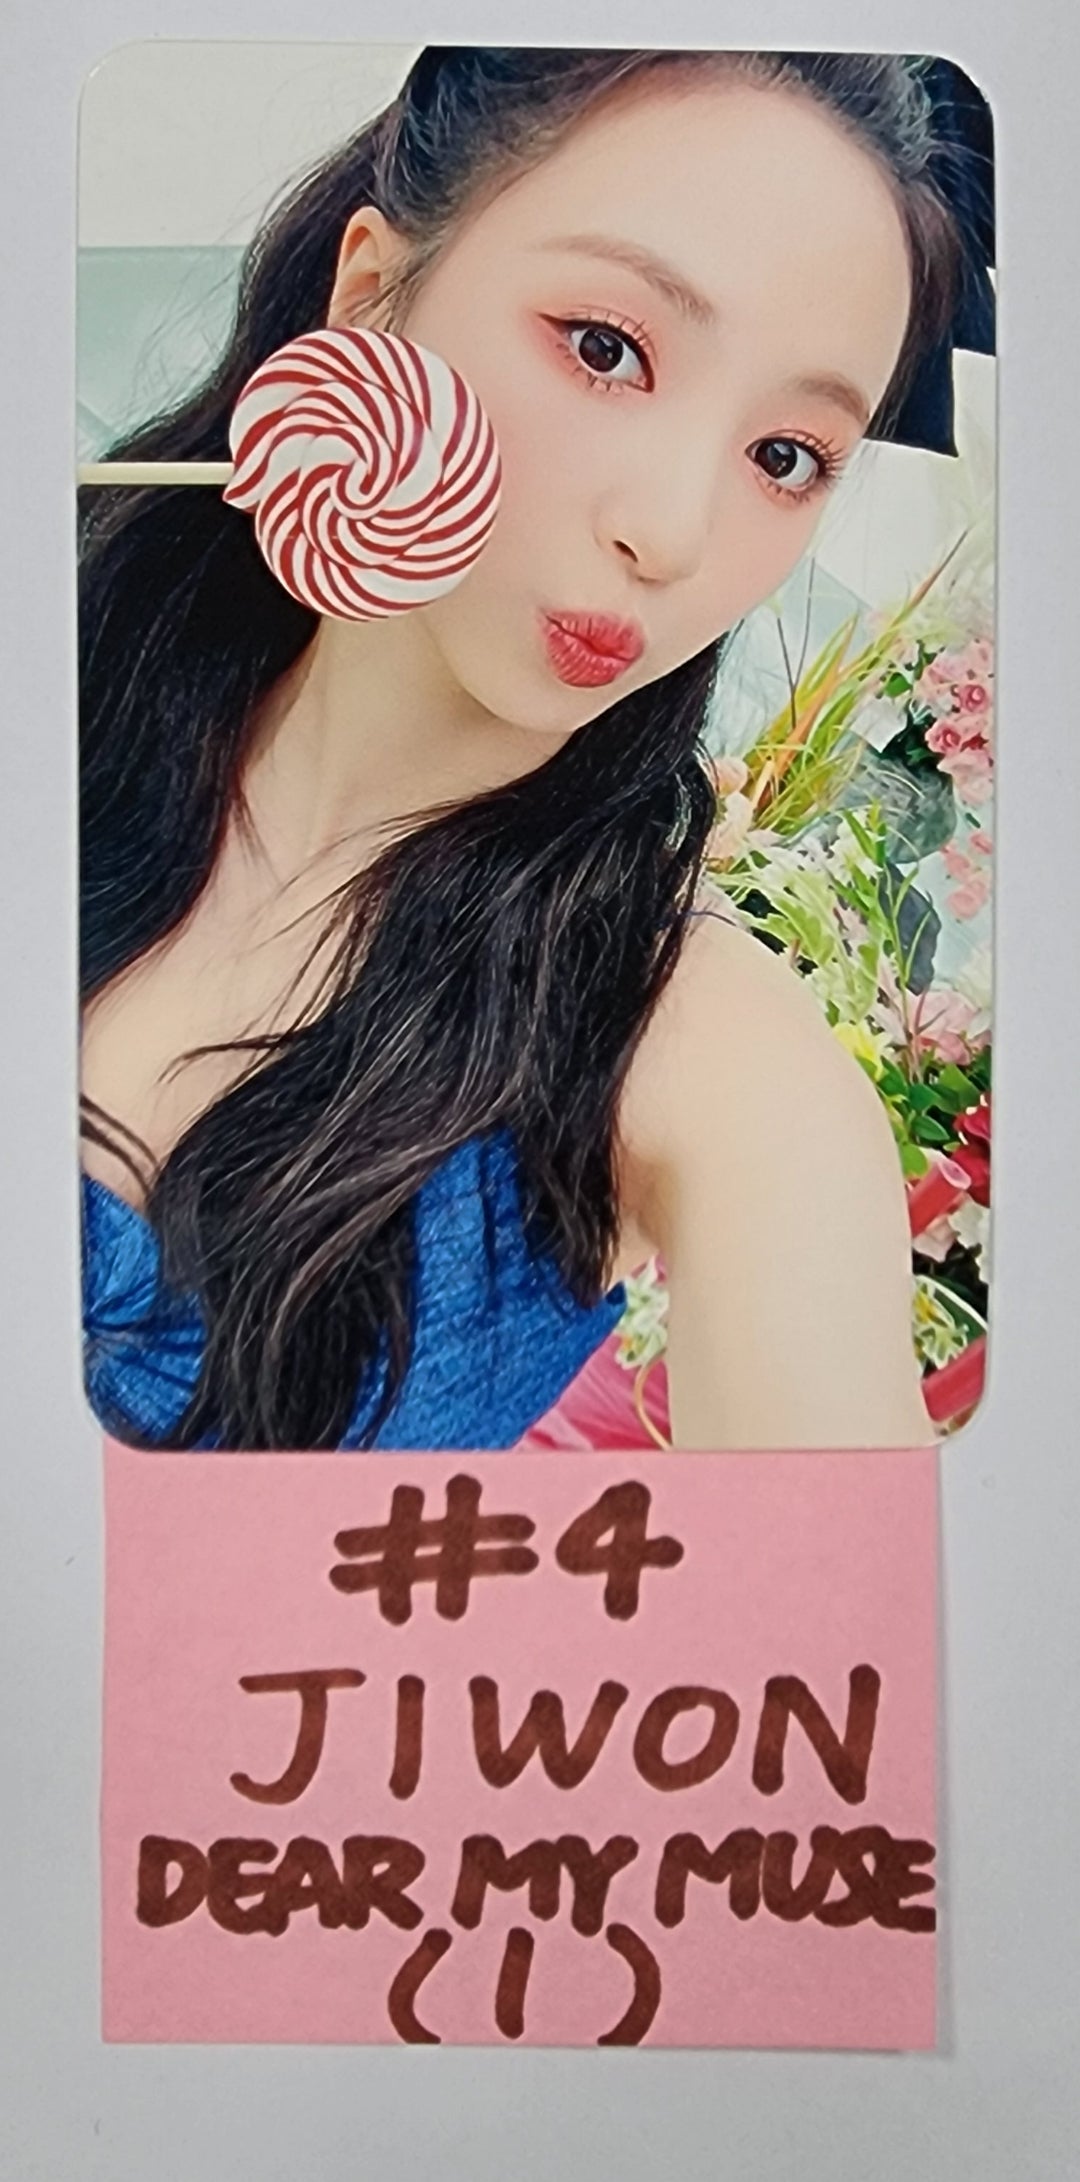 Cherry Bullet 'Cherry Dash' - Dear My Muse Fansign Event Photocard